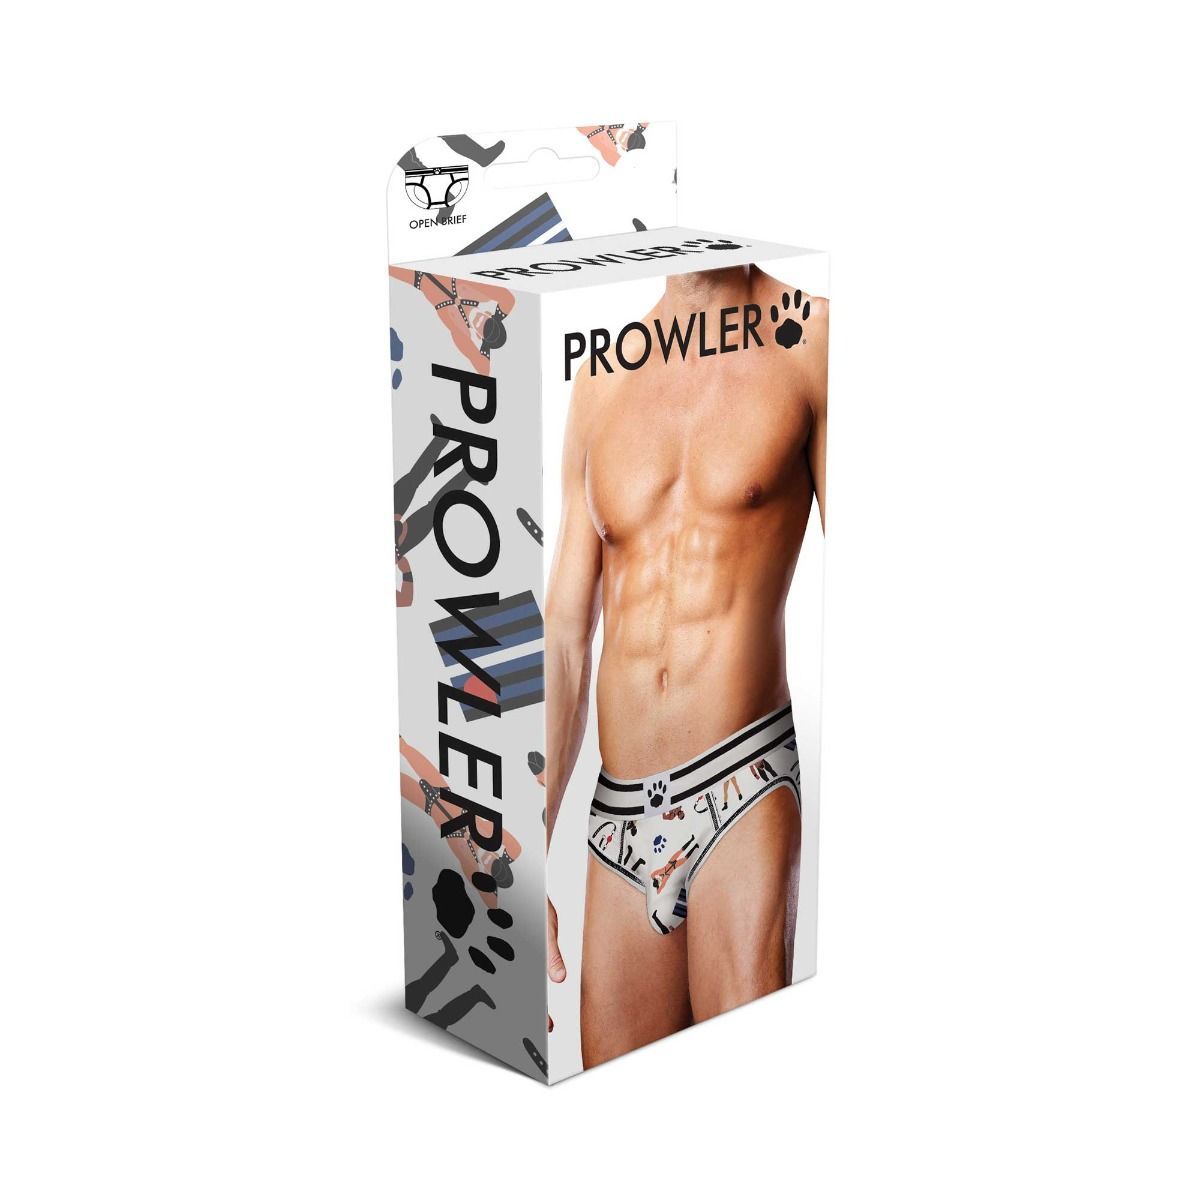 Prowler Leather Pride Open Brief - One Stop Adult Shop